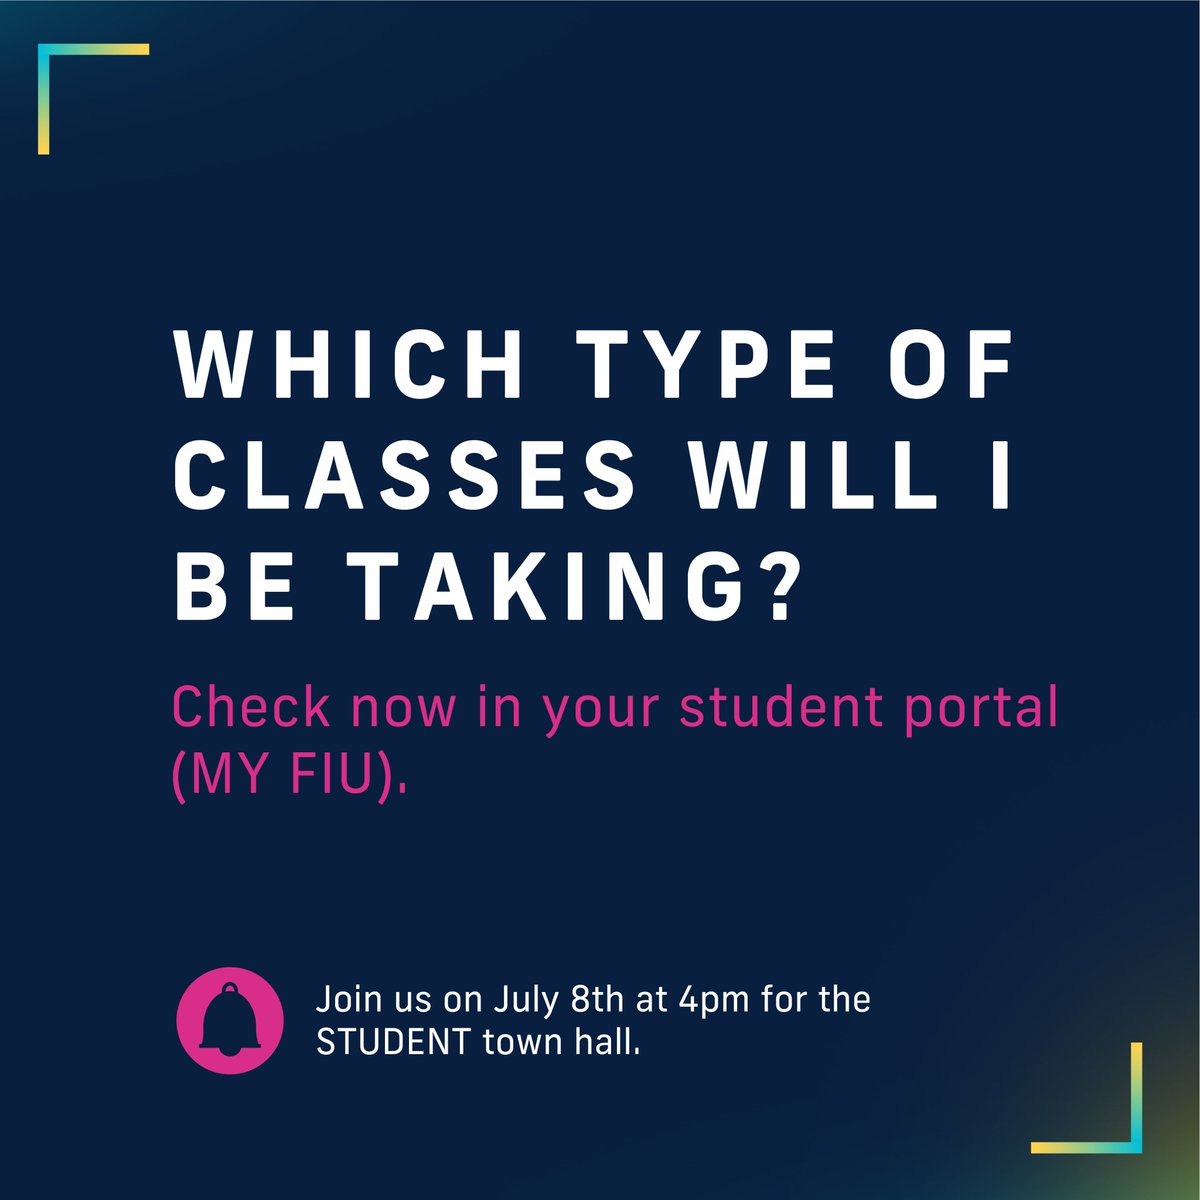 #FIUReopening - Classes and modalities are available now. Check your student portal (My FIU). Check periodically before the fall semester starts to make sure the course modality hasn’t changed.